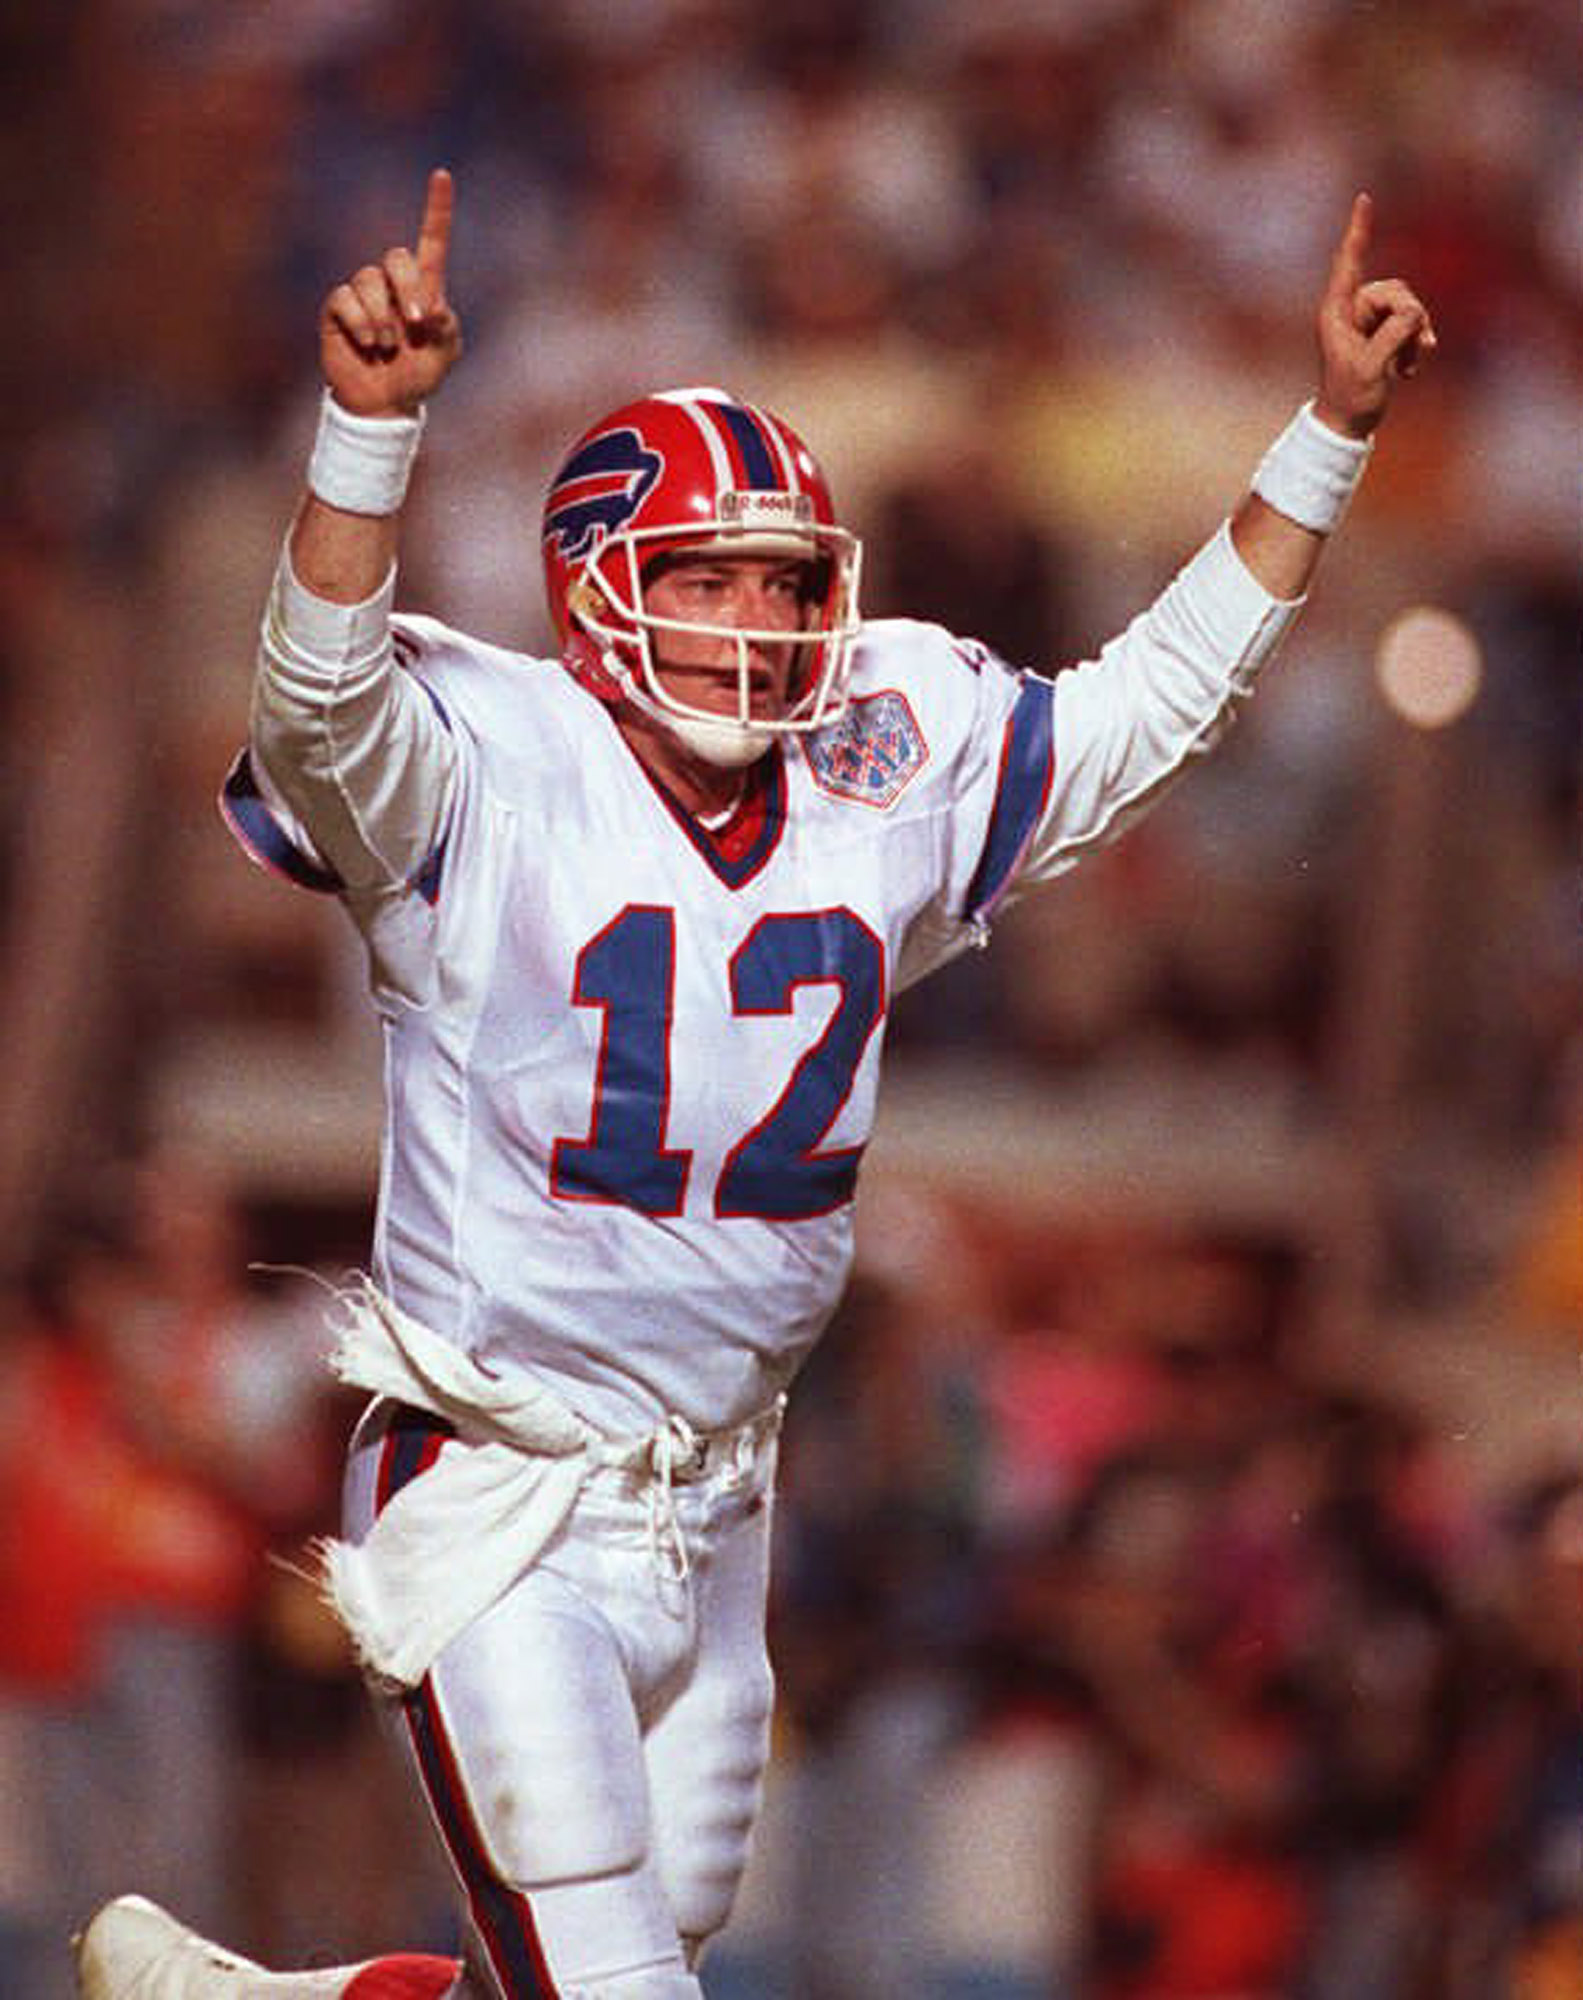 Bills Hall of Fame QB Jim Kelly talks about playing at The U, the USFL & why he originally didn’t want to play in Buffalo on this segment of Thursday Night Tailgate